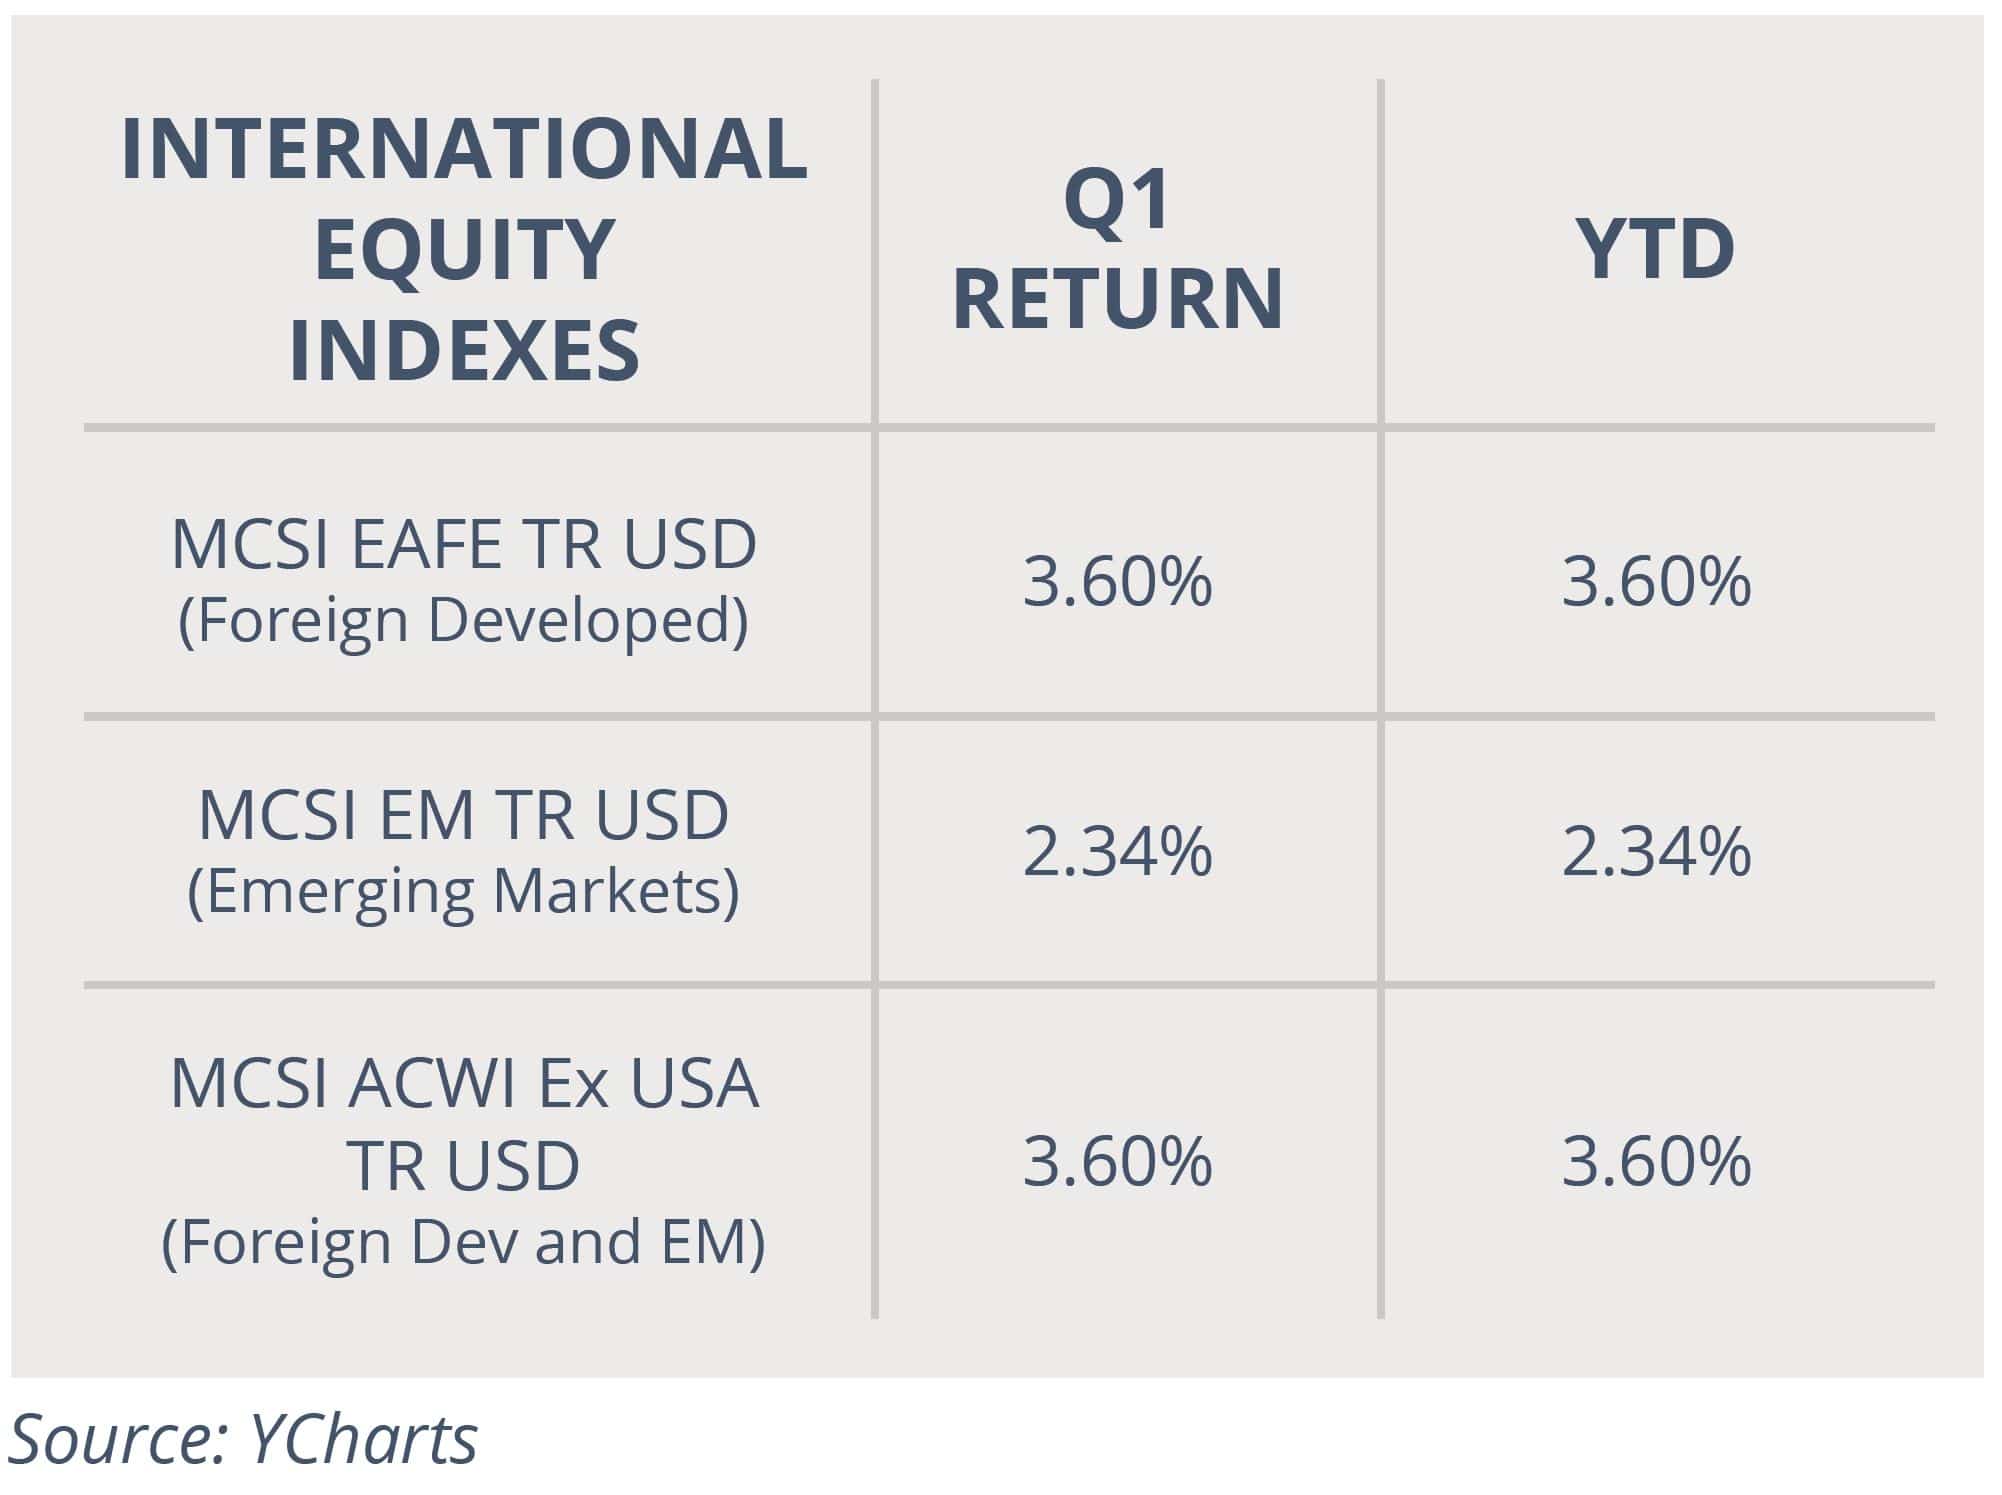 International Equity Indexes April 2021